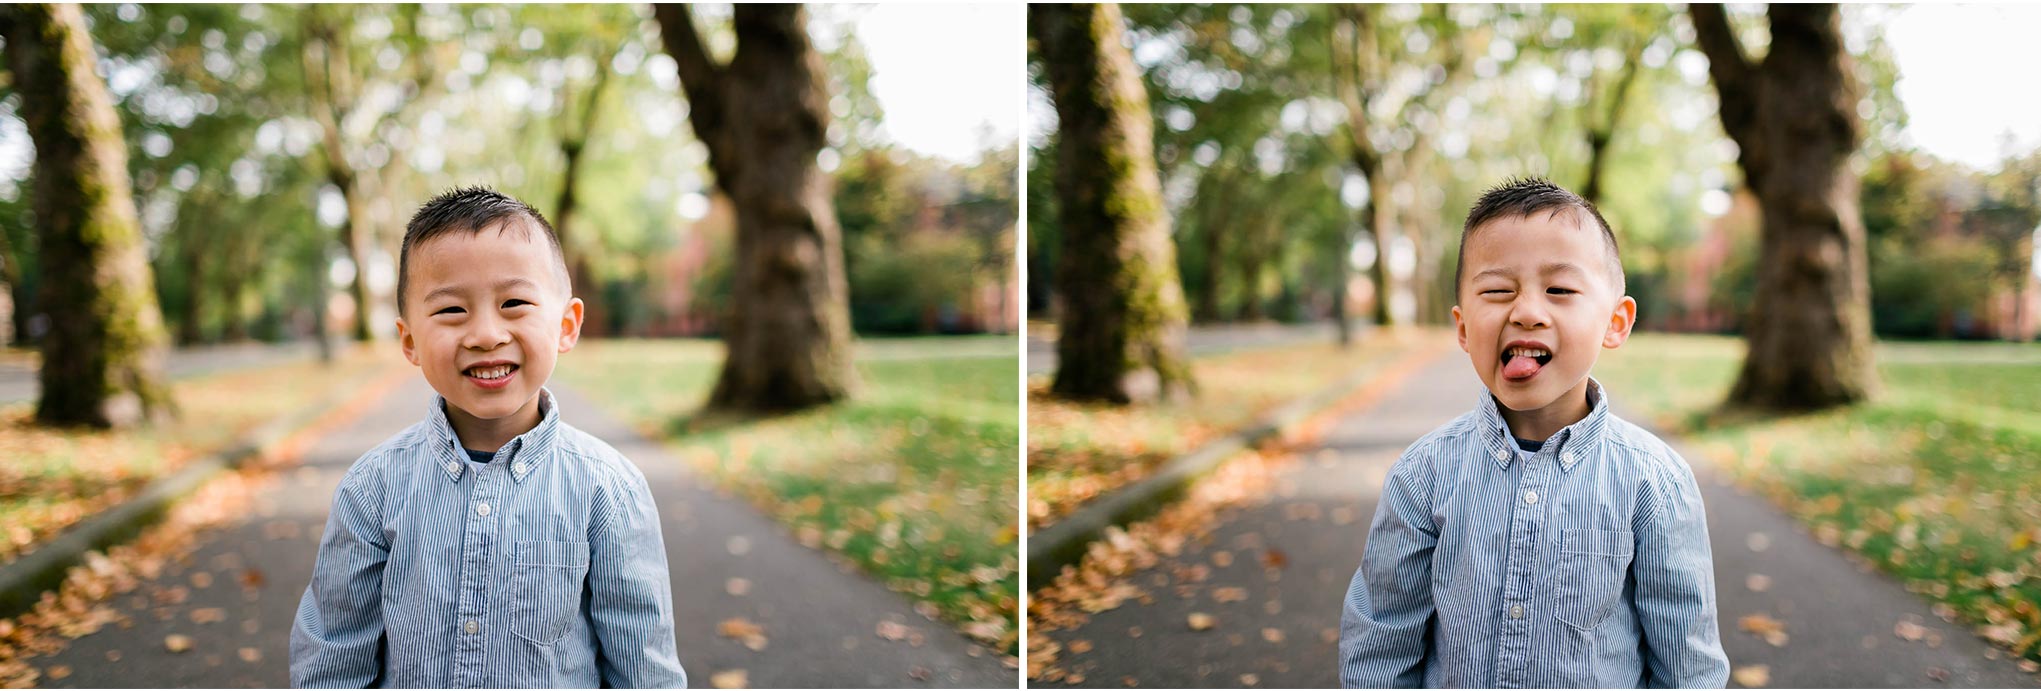 Boy making funny faces | Seattle Family Photographer | By G. Lin Photography